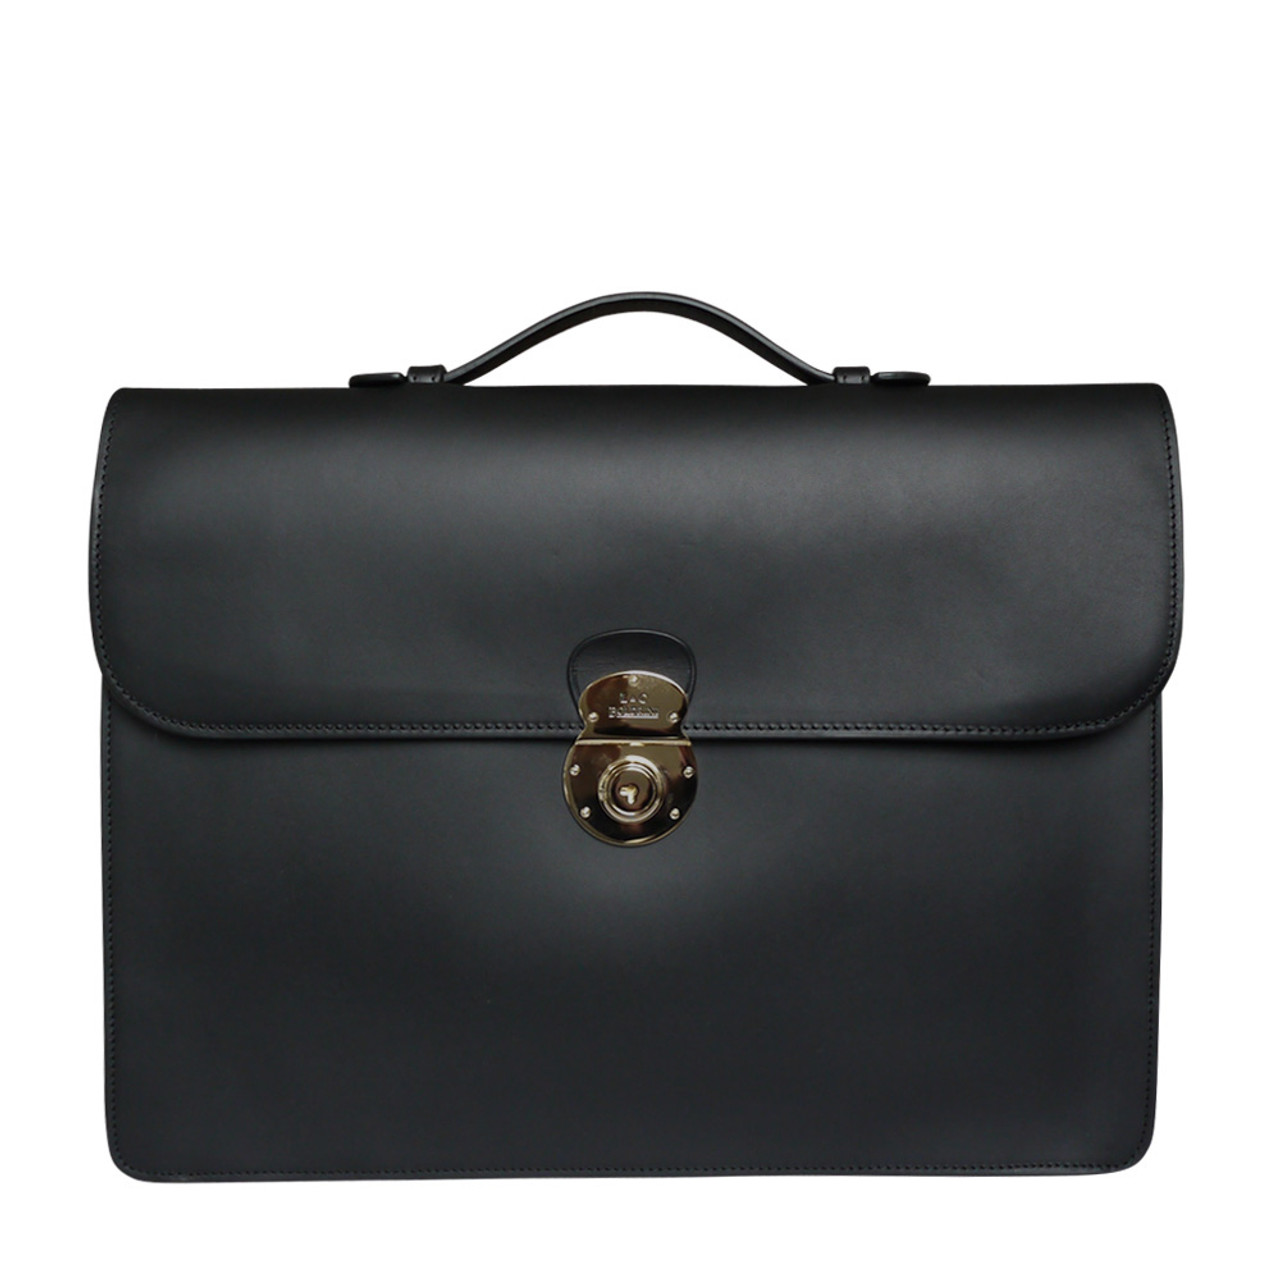 SLOW TRADITIONAL bono flap briefcase BK 【91%OFF!】 - バッグ